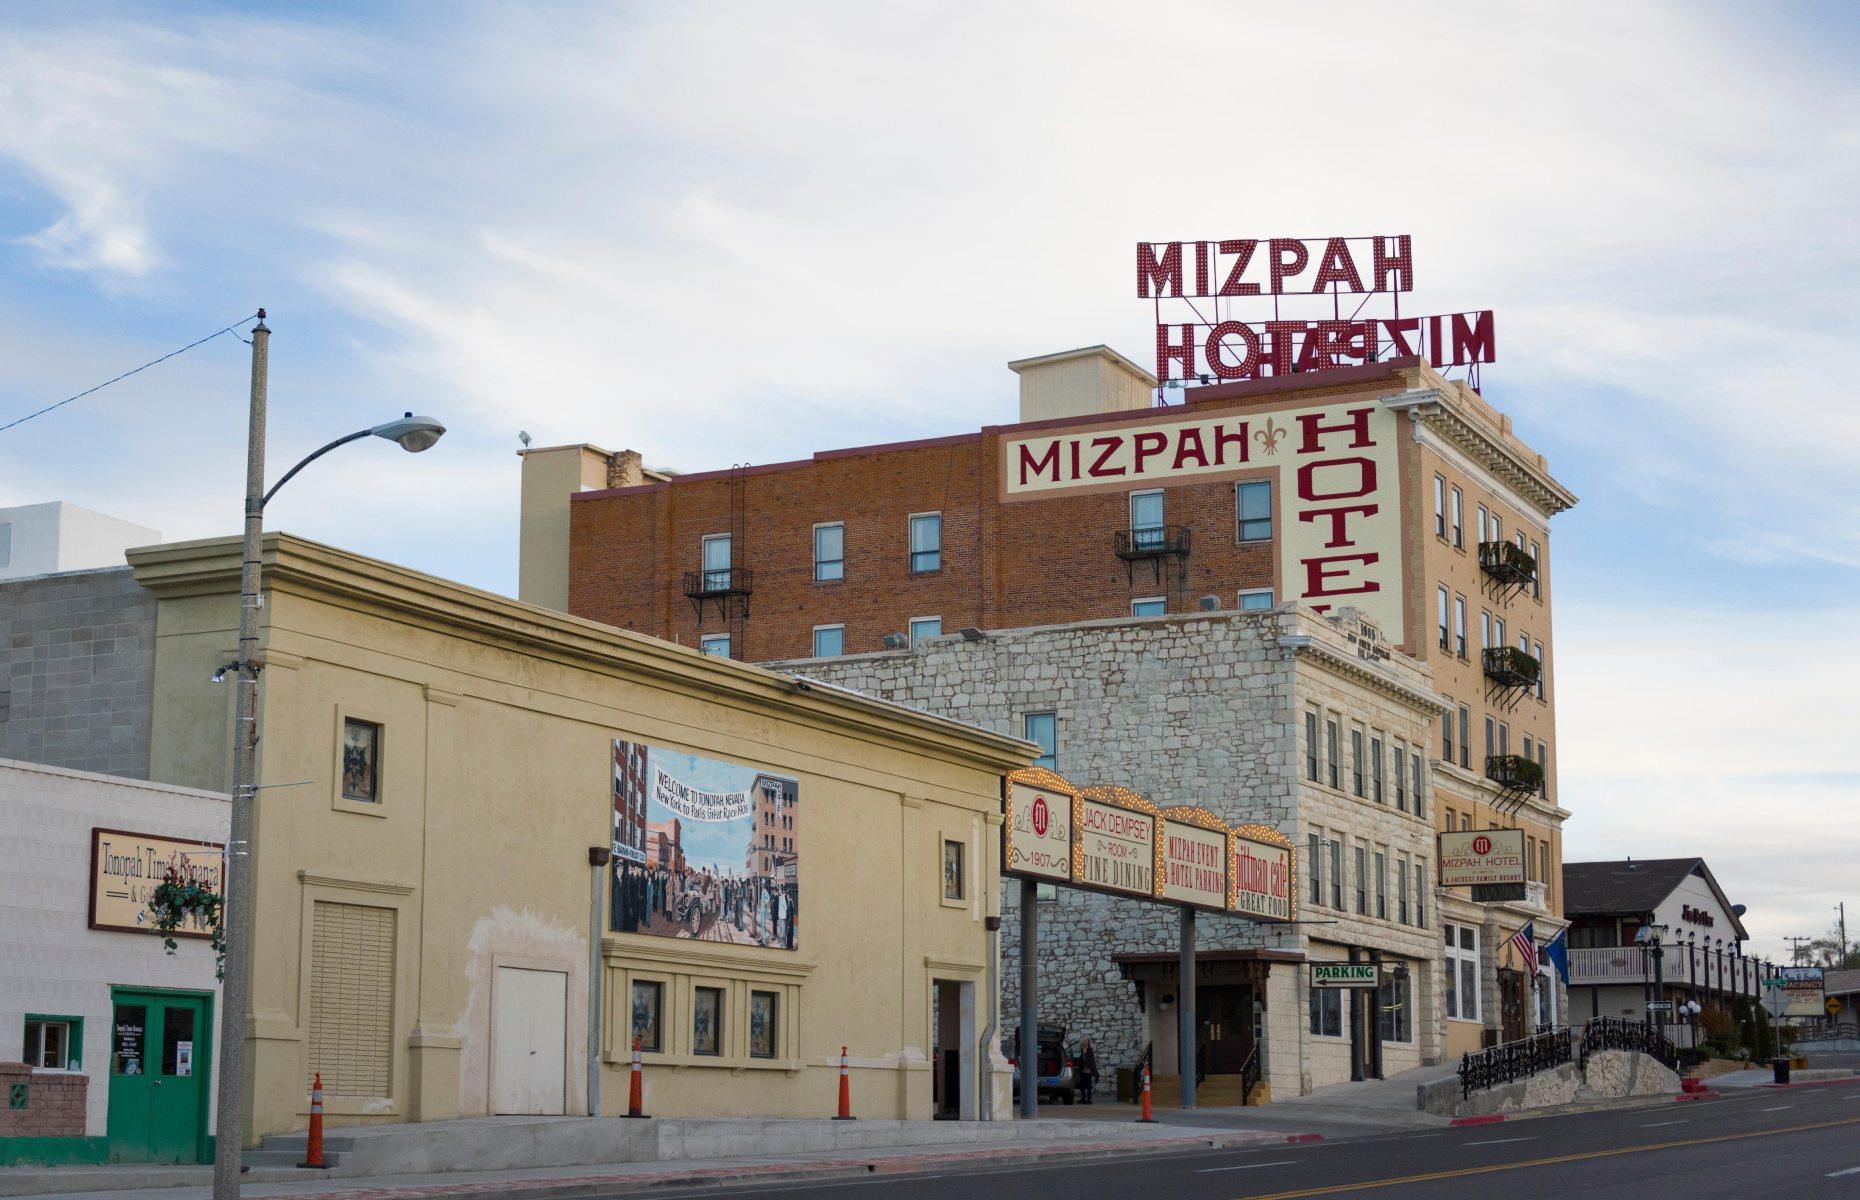 <p>Located in the heart of downtown Tonopah, The Mizpah Hotel was once referred to as “the finest stone hotel in the desert.” Built in 1907 over five storeys, it was the tallest building in the Silver State for 25 years until the Hotel Nevada came along to steal its crown. With over a century of human history, this grand venue has hosted prospectors, politicians, playboys and all manner of VIPs throughout the years. But there is one guest who has stayed longer than most...</p>